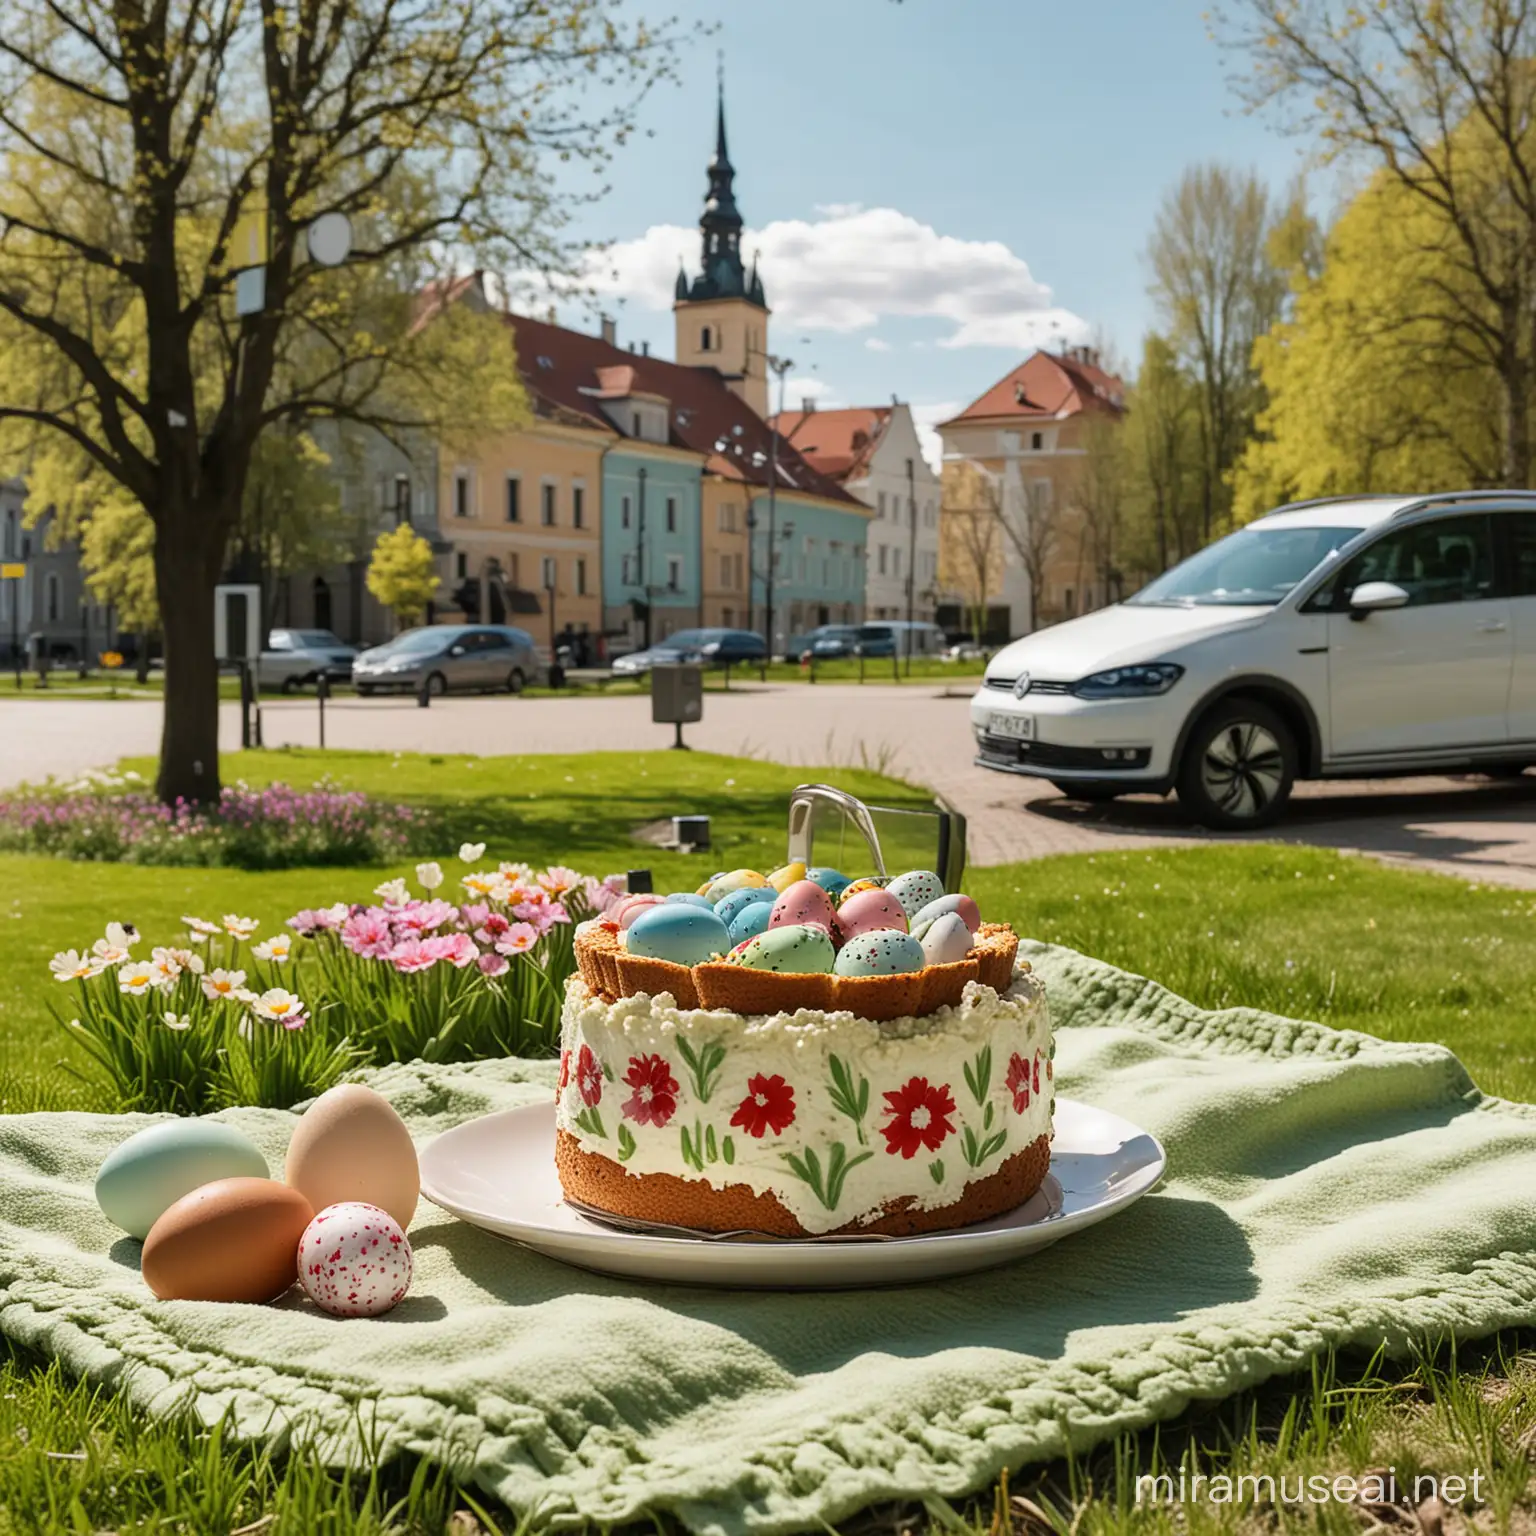 A beautiful spring day in a park in Vilnius, Lithuania. A close-up foreground shows Easter eggs in a basket and a cut piece of Easter cake on a plate, placed on a blanket on a green meadow with spring flowers. An electric vehicle charging station can be seen in the distance and an electric VW ID.4 parked behind the charging station. Buildings from a beautiful residential neighborhood in Vilnius, Lithuania can be seen behind the park.